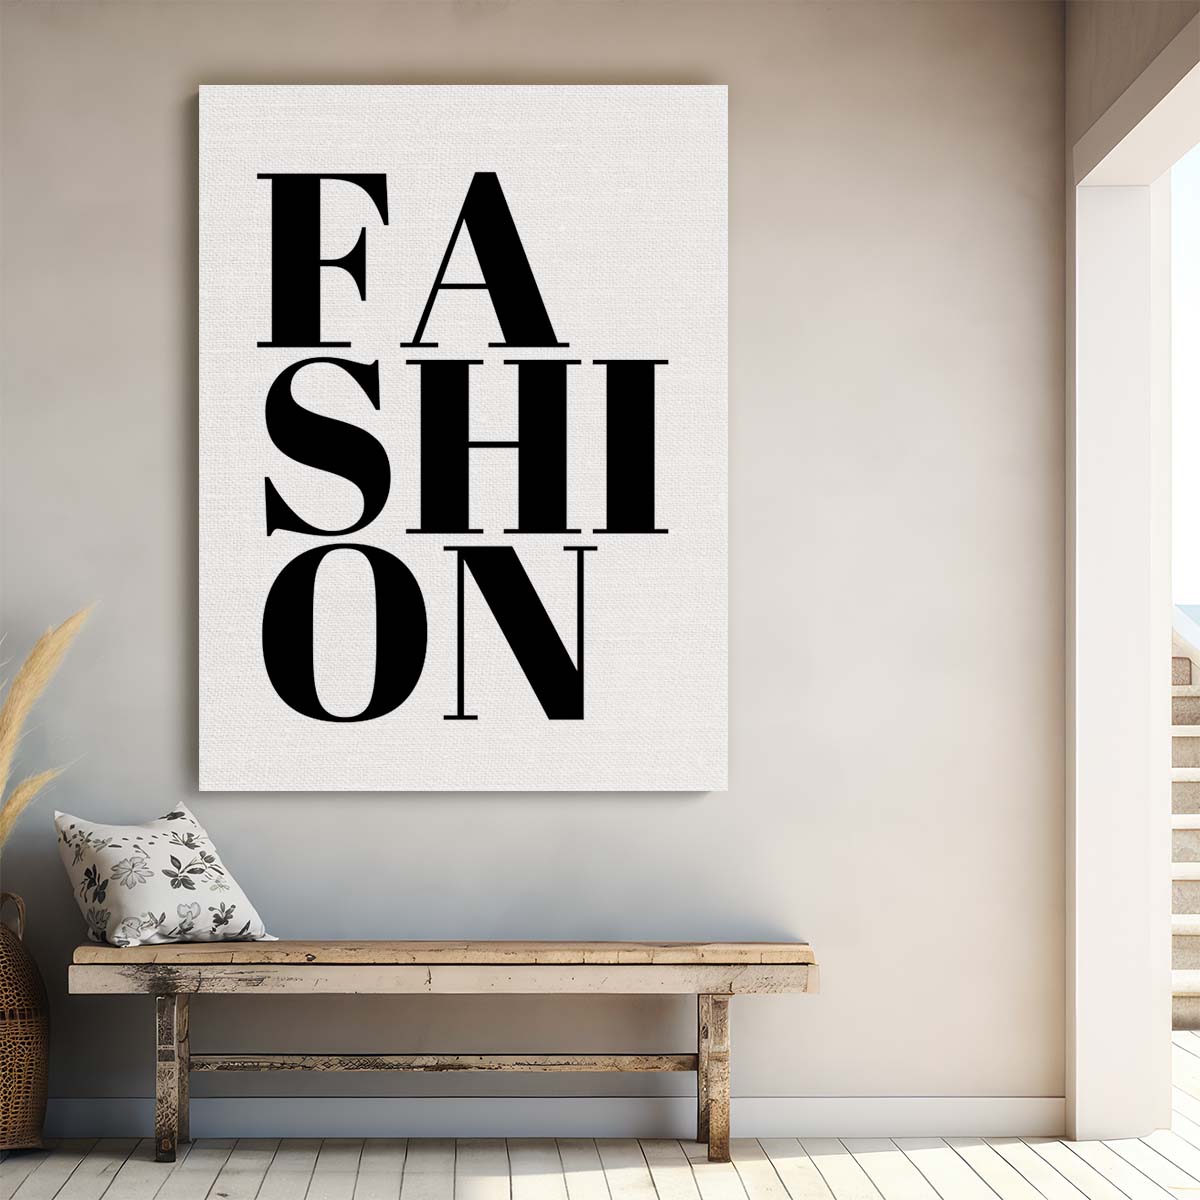 Minimalist Fashion Quote Illustration by Kristina N - Monochrome Wall Art by Luxuriance Designs, made in USA